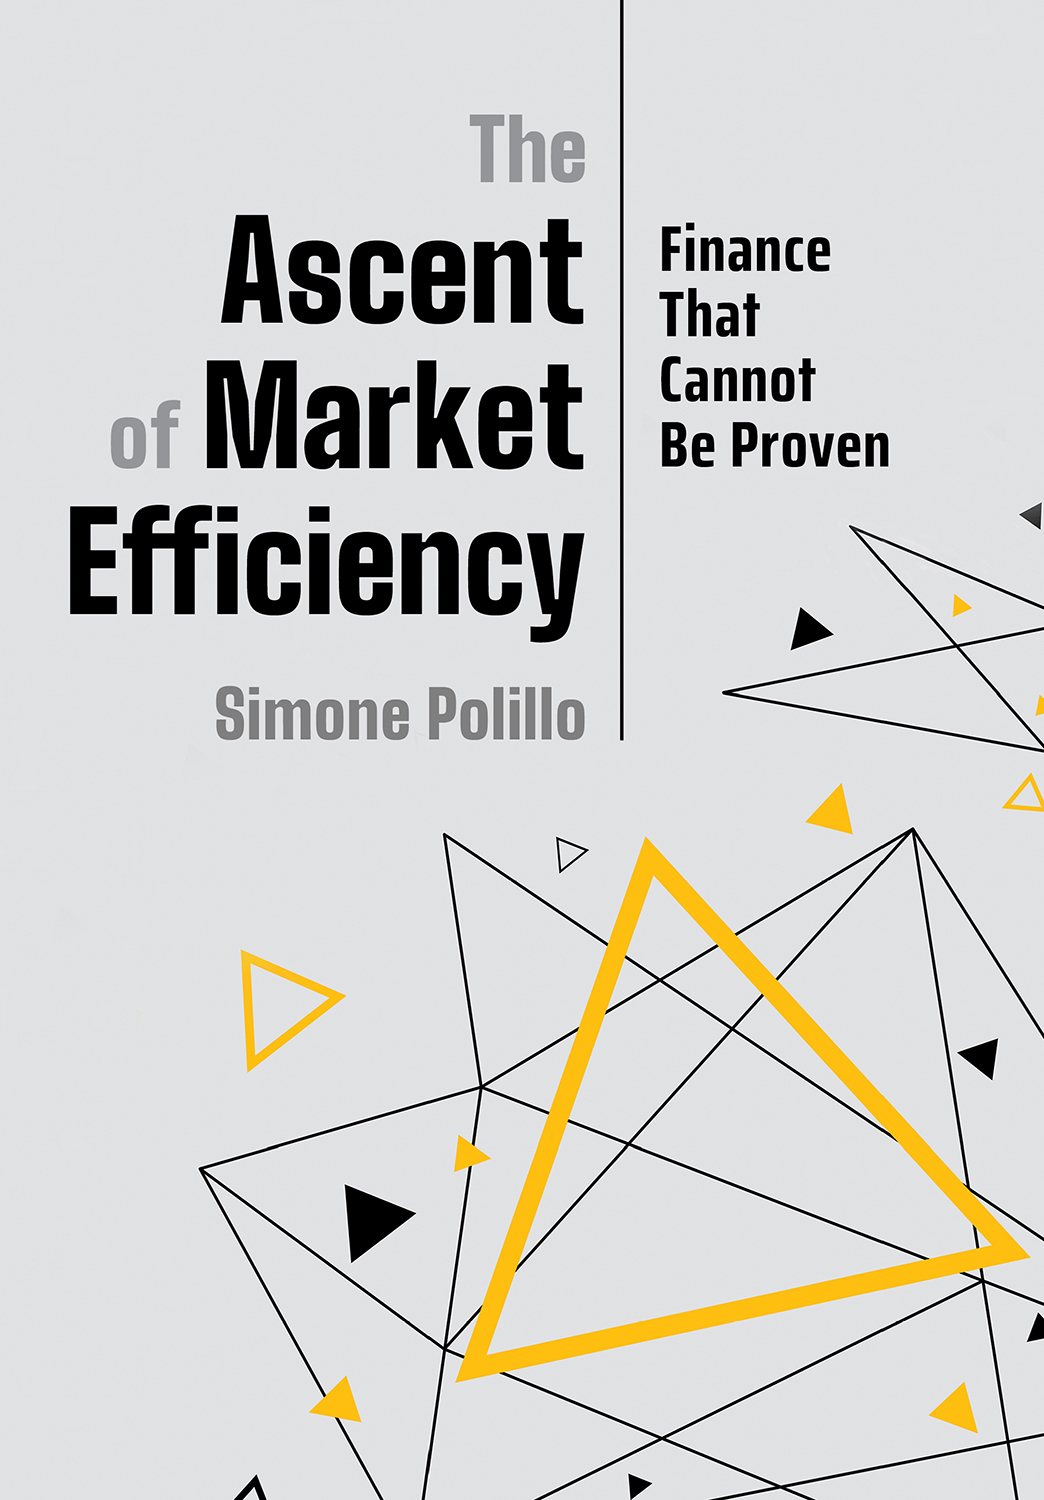 The Ascent of Market Efficiency